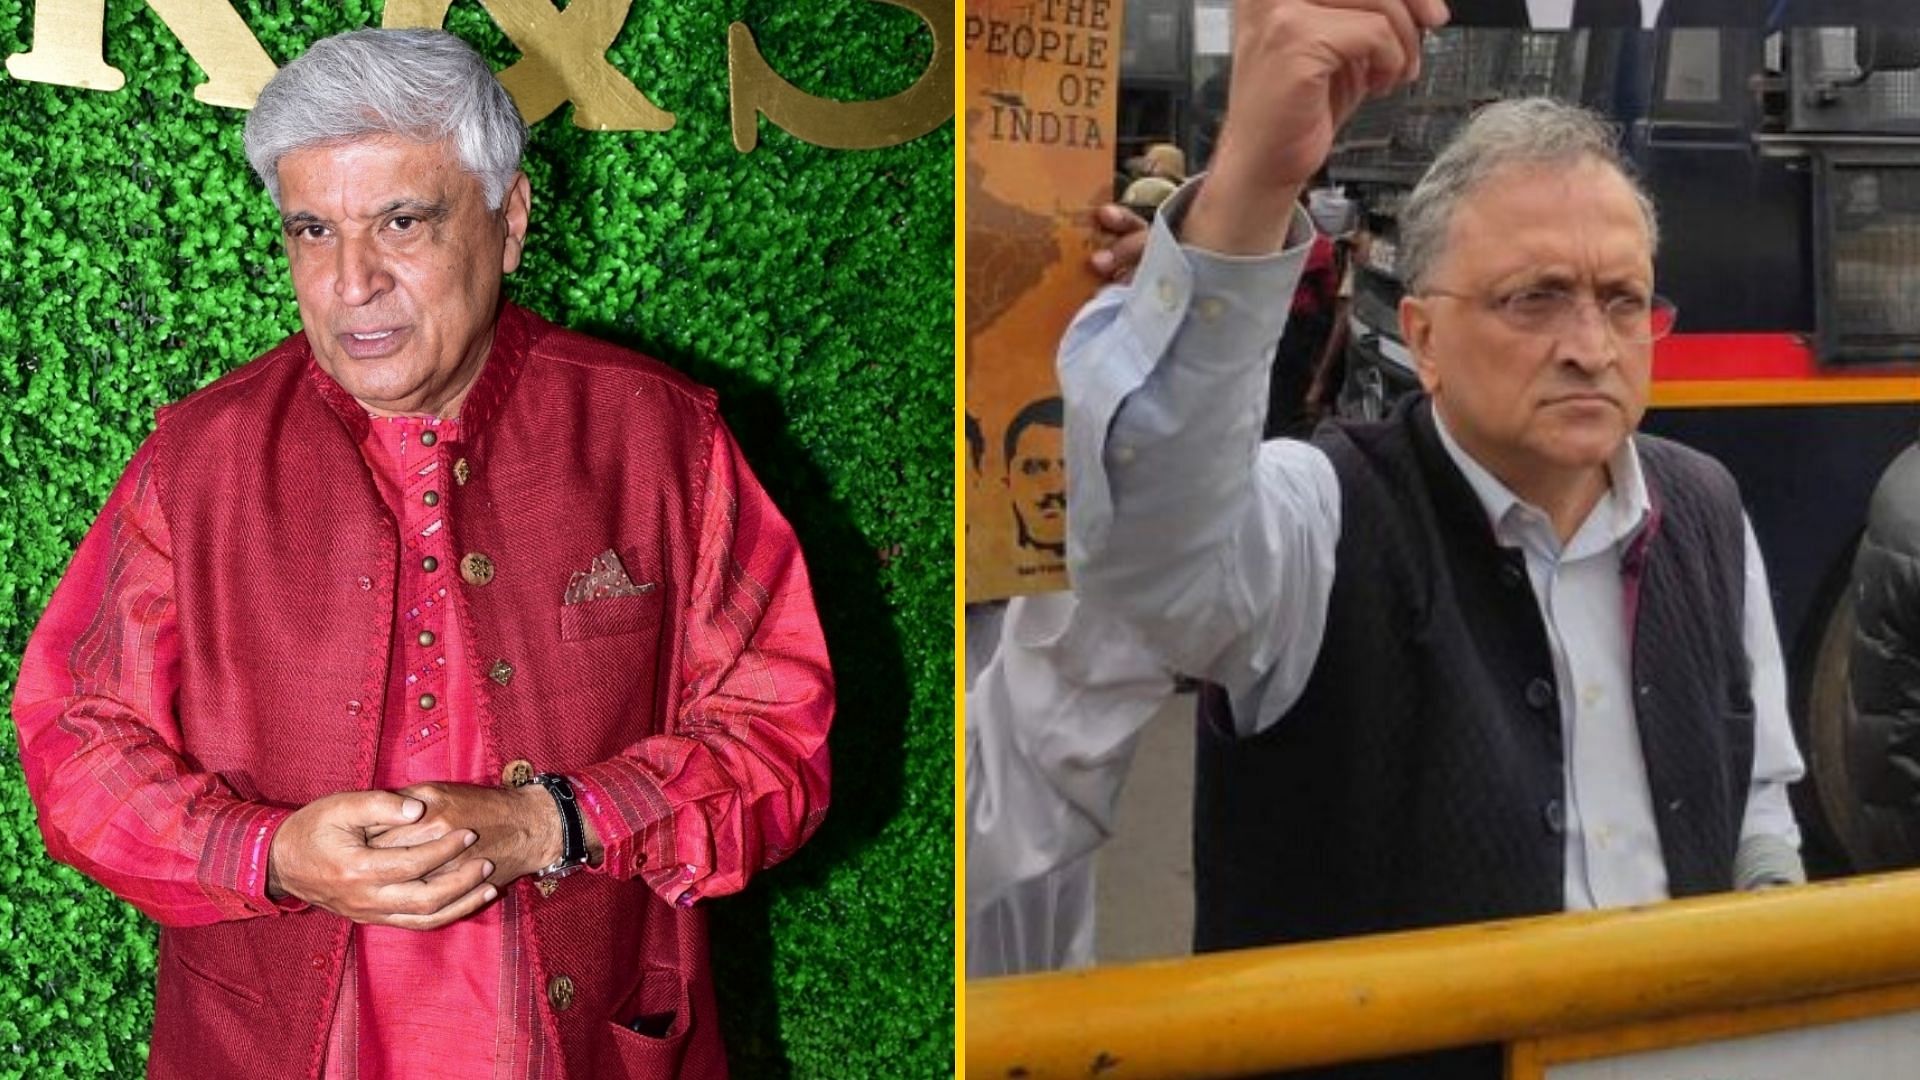 Javed Akhtar has criticised the Bengaluru police for detaining Ram Guha during an anti-CAA protest.